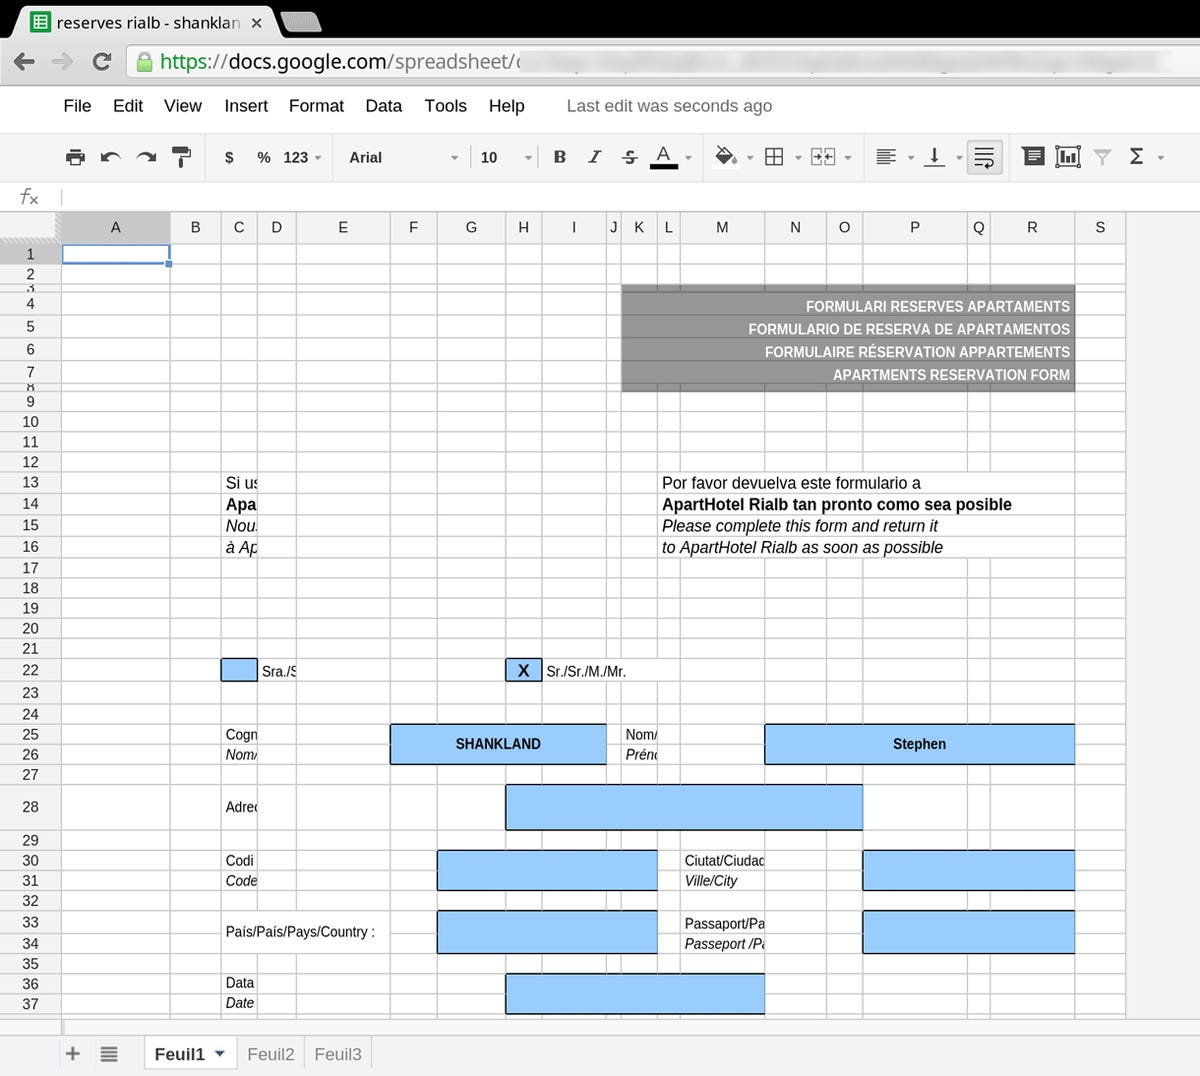 Google Sheets made a hash out of a fairly unsophisticated Excel spreadsheet, overwriting words, dropping a graphic altogether, and generally looking ugly.